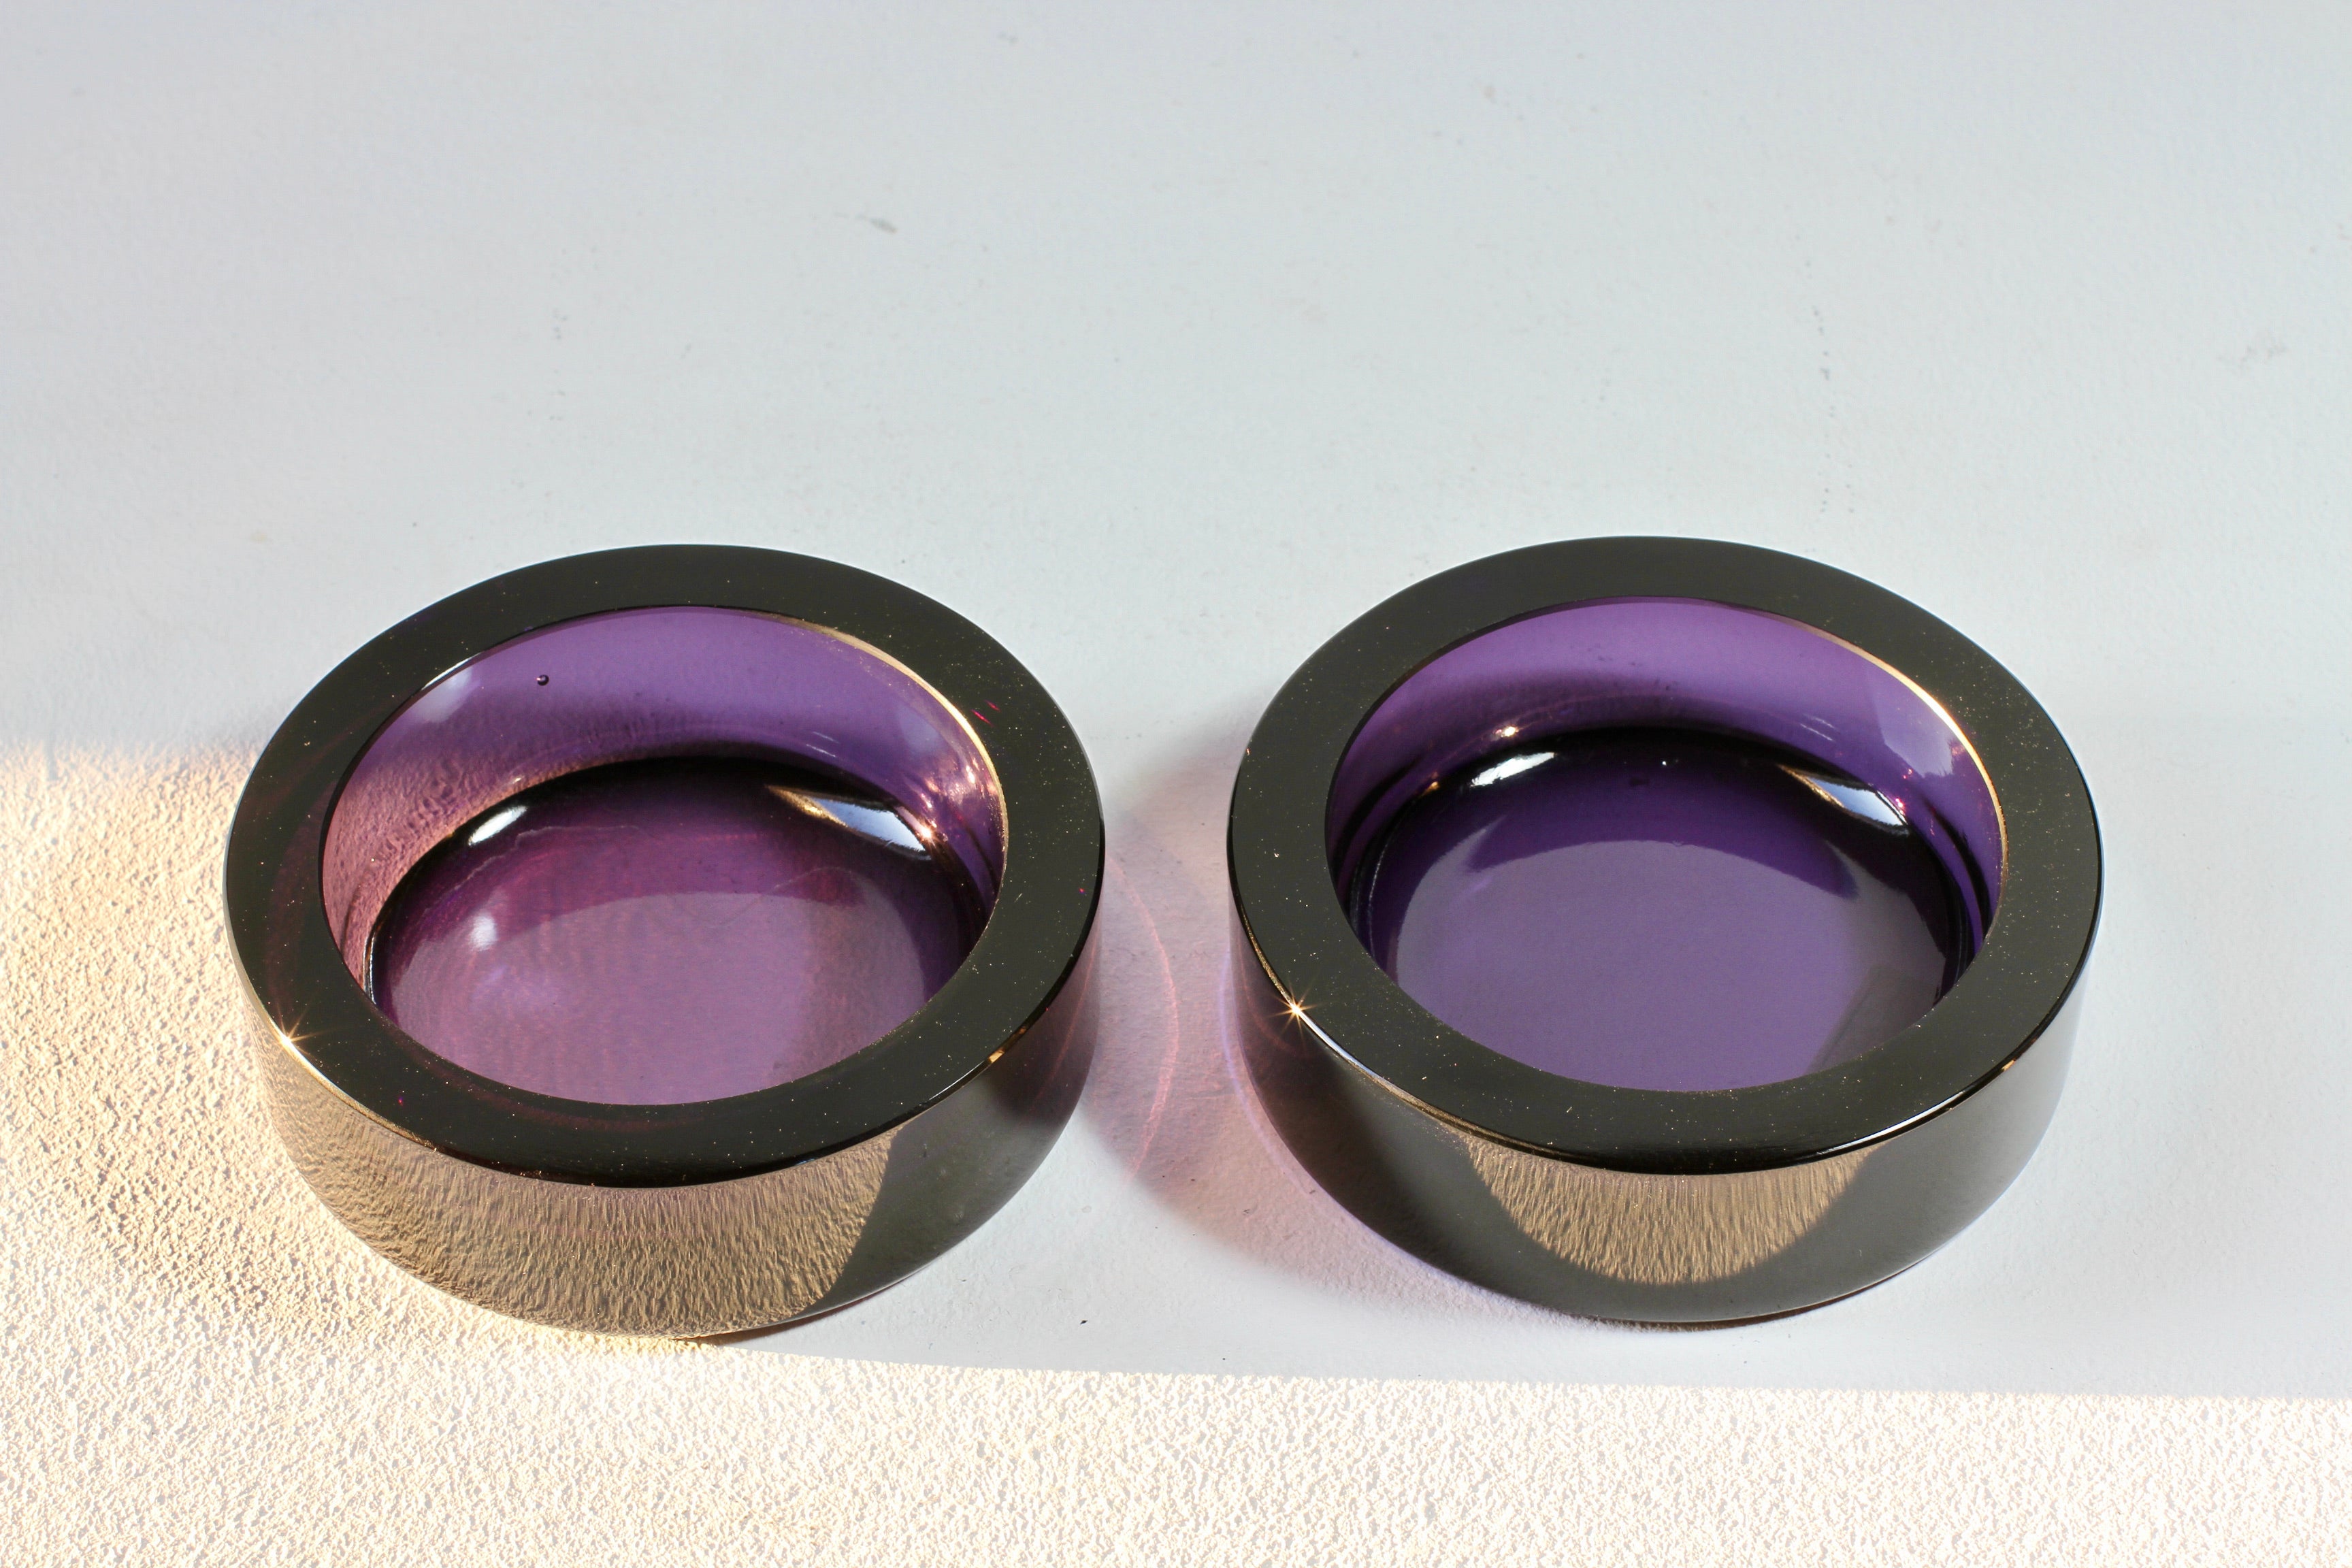 Italian Cenedese Vintage Pair of Purple Murano Glass Dishes, Bowls or Ashtrays 1970s For Sale